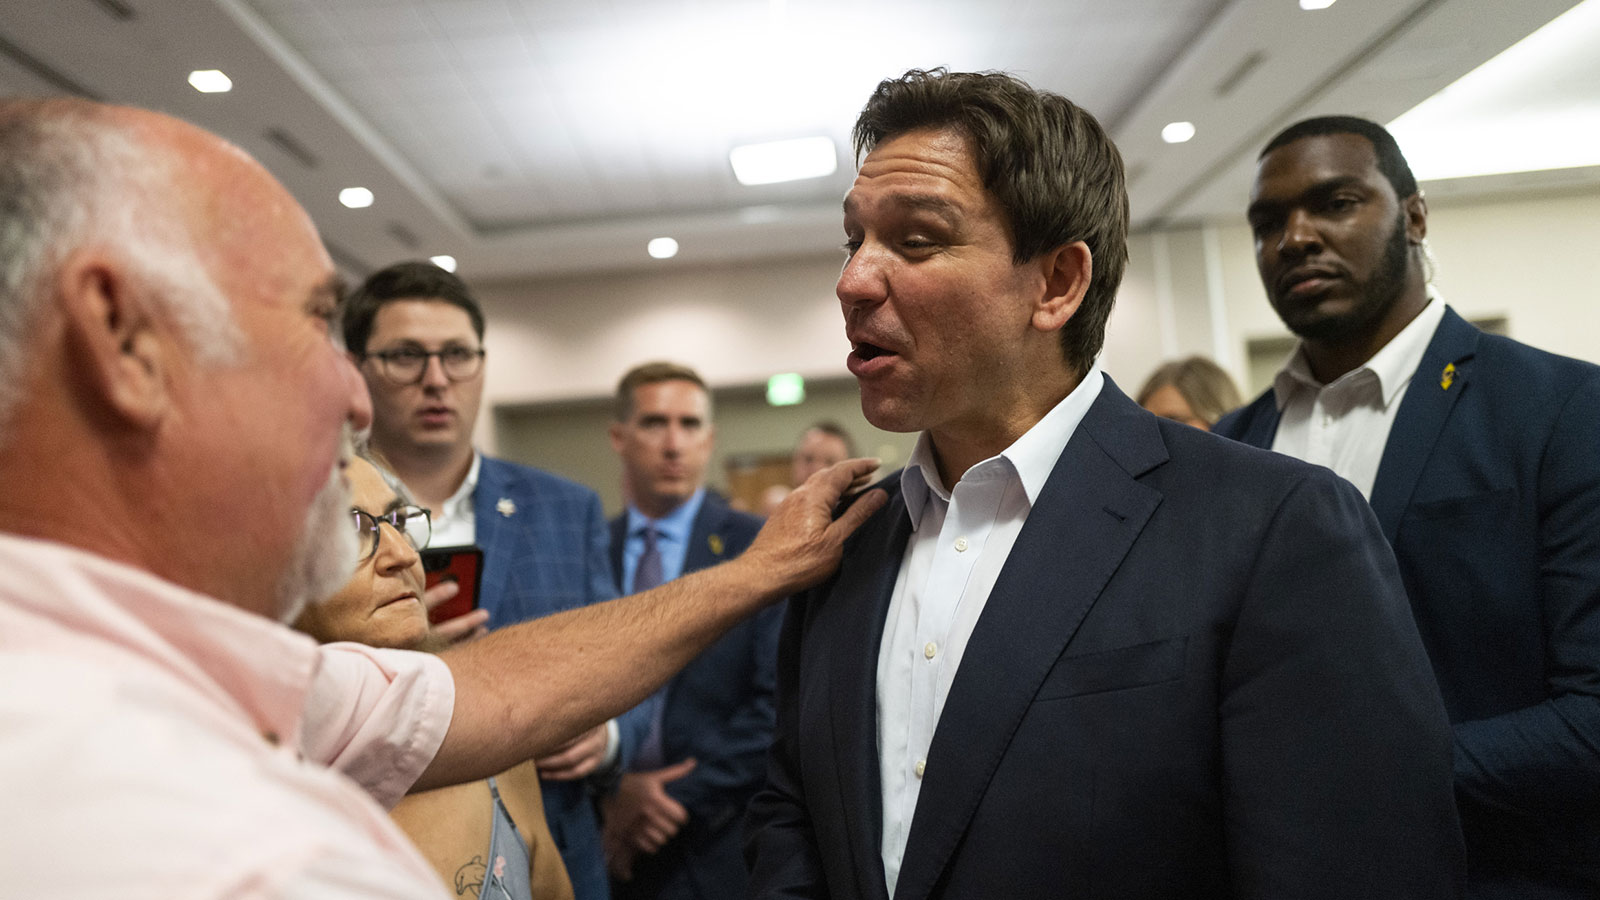 The NAACP is right: DeSantis has made Florida dangerous for Black Americans